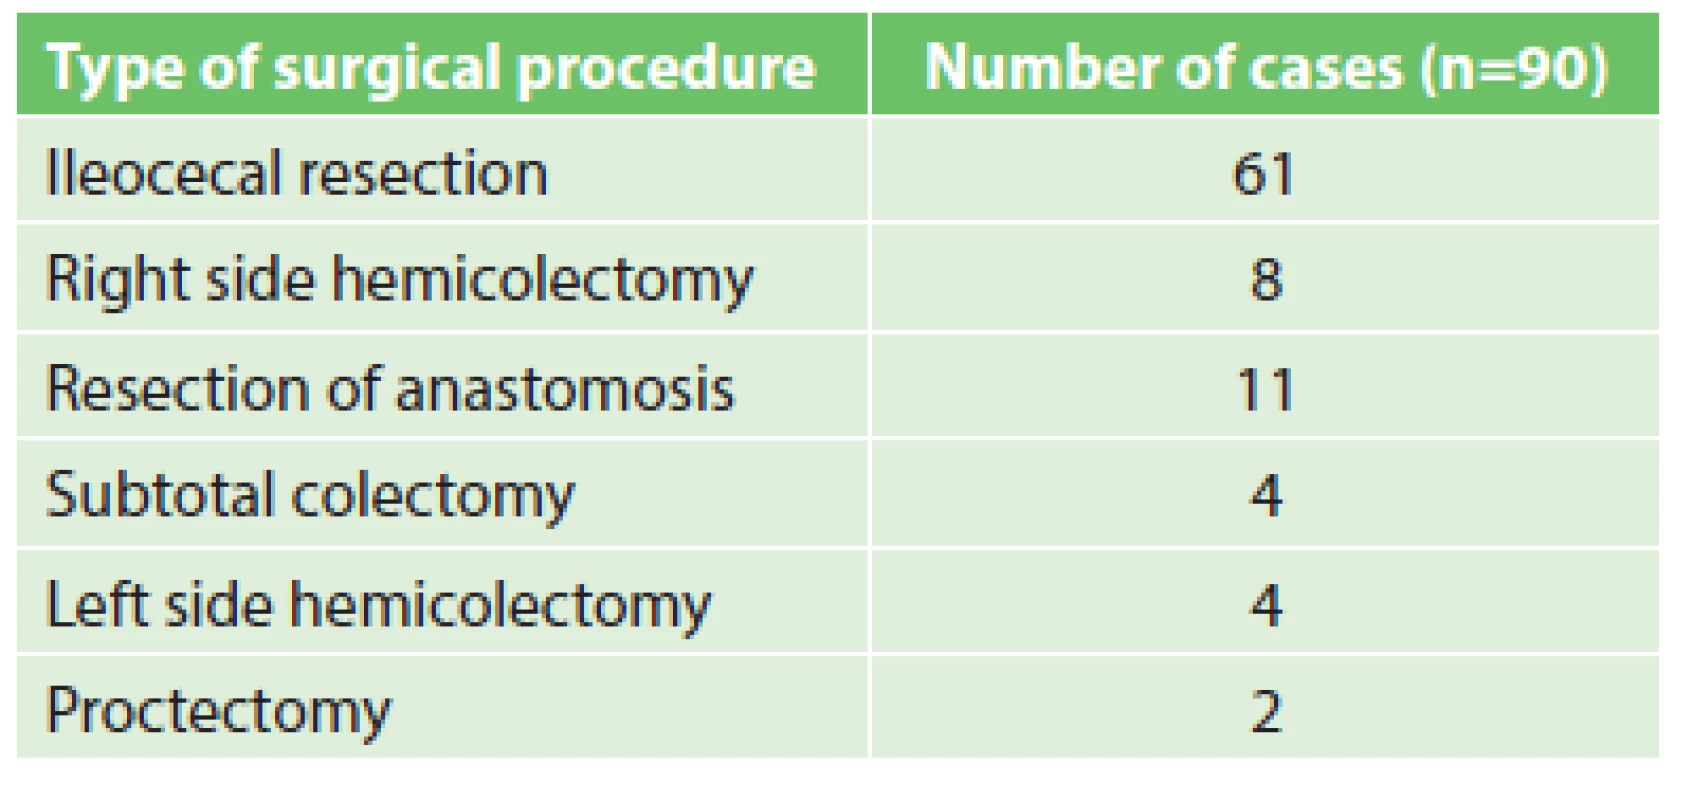 Summary of surgical procedures